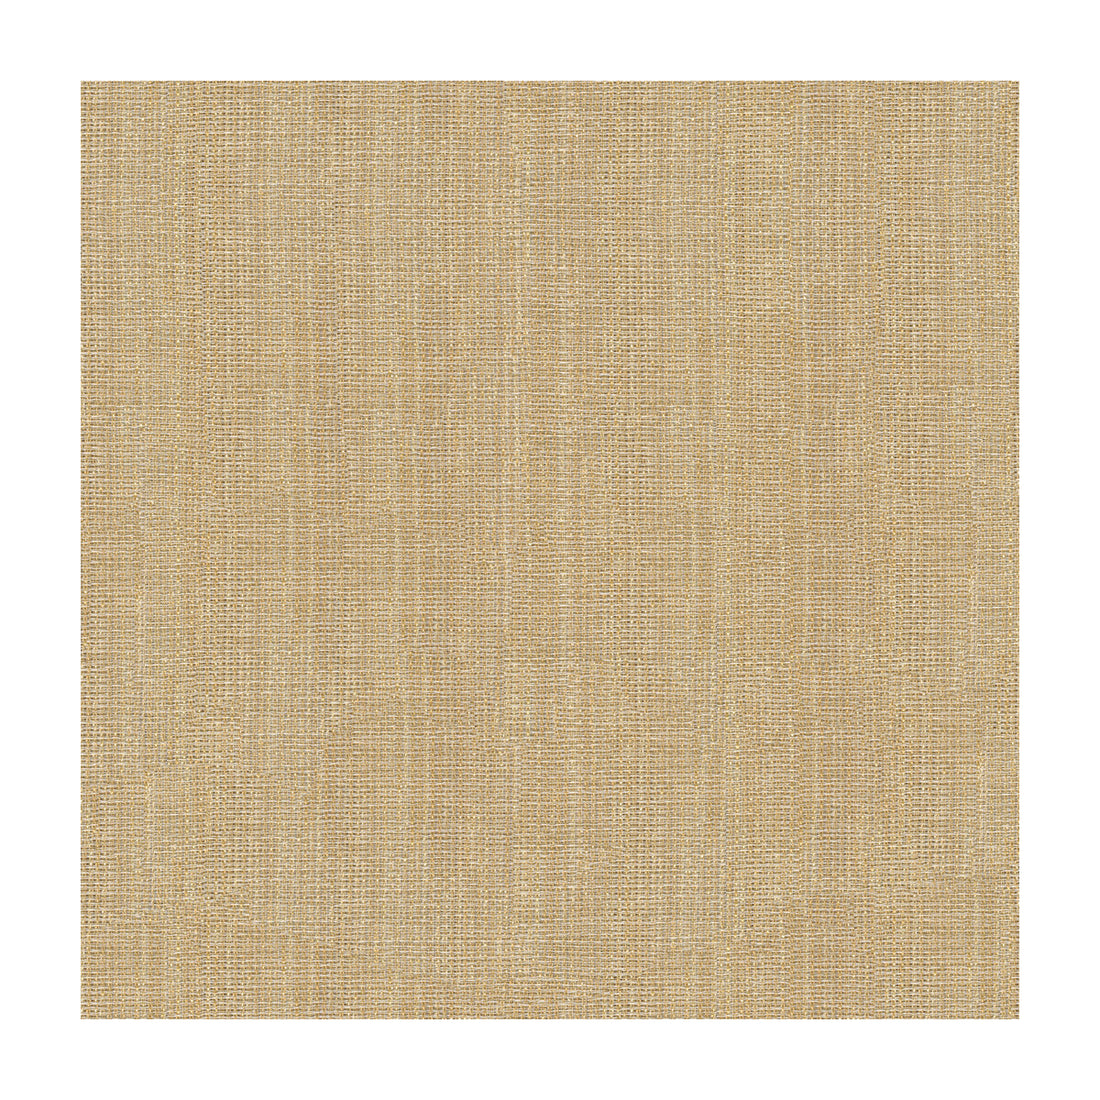 Kravet Contract fabric in 4161-16 color - pattern 4161.16.0 - by Kravet Contract